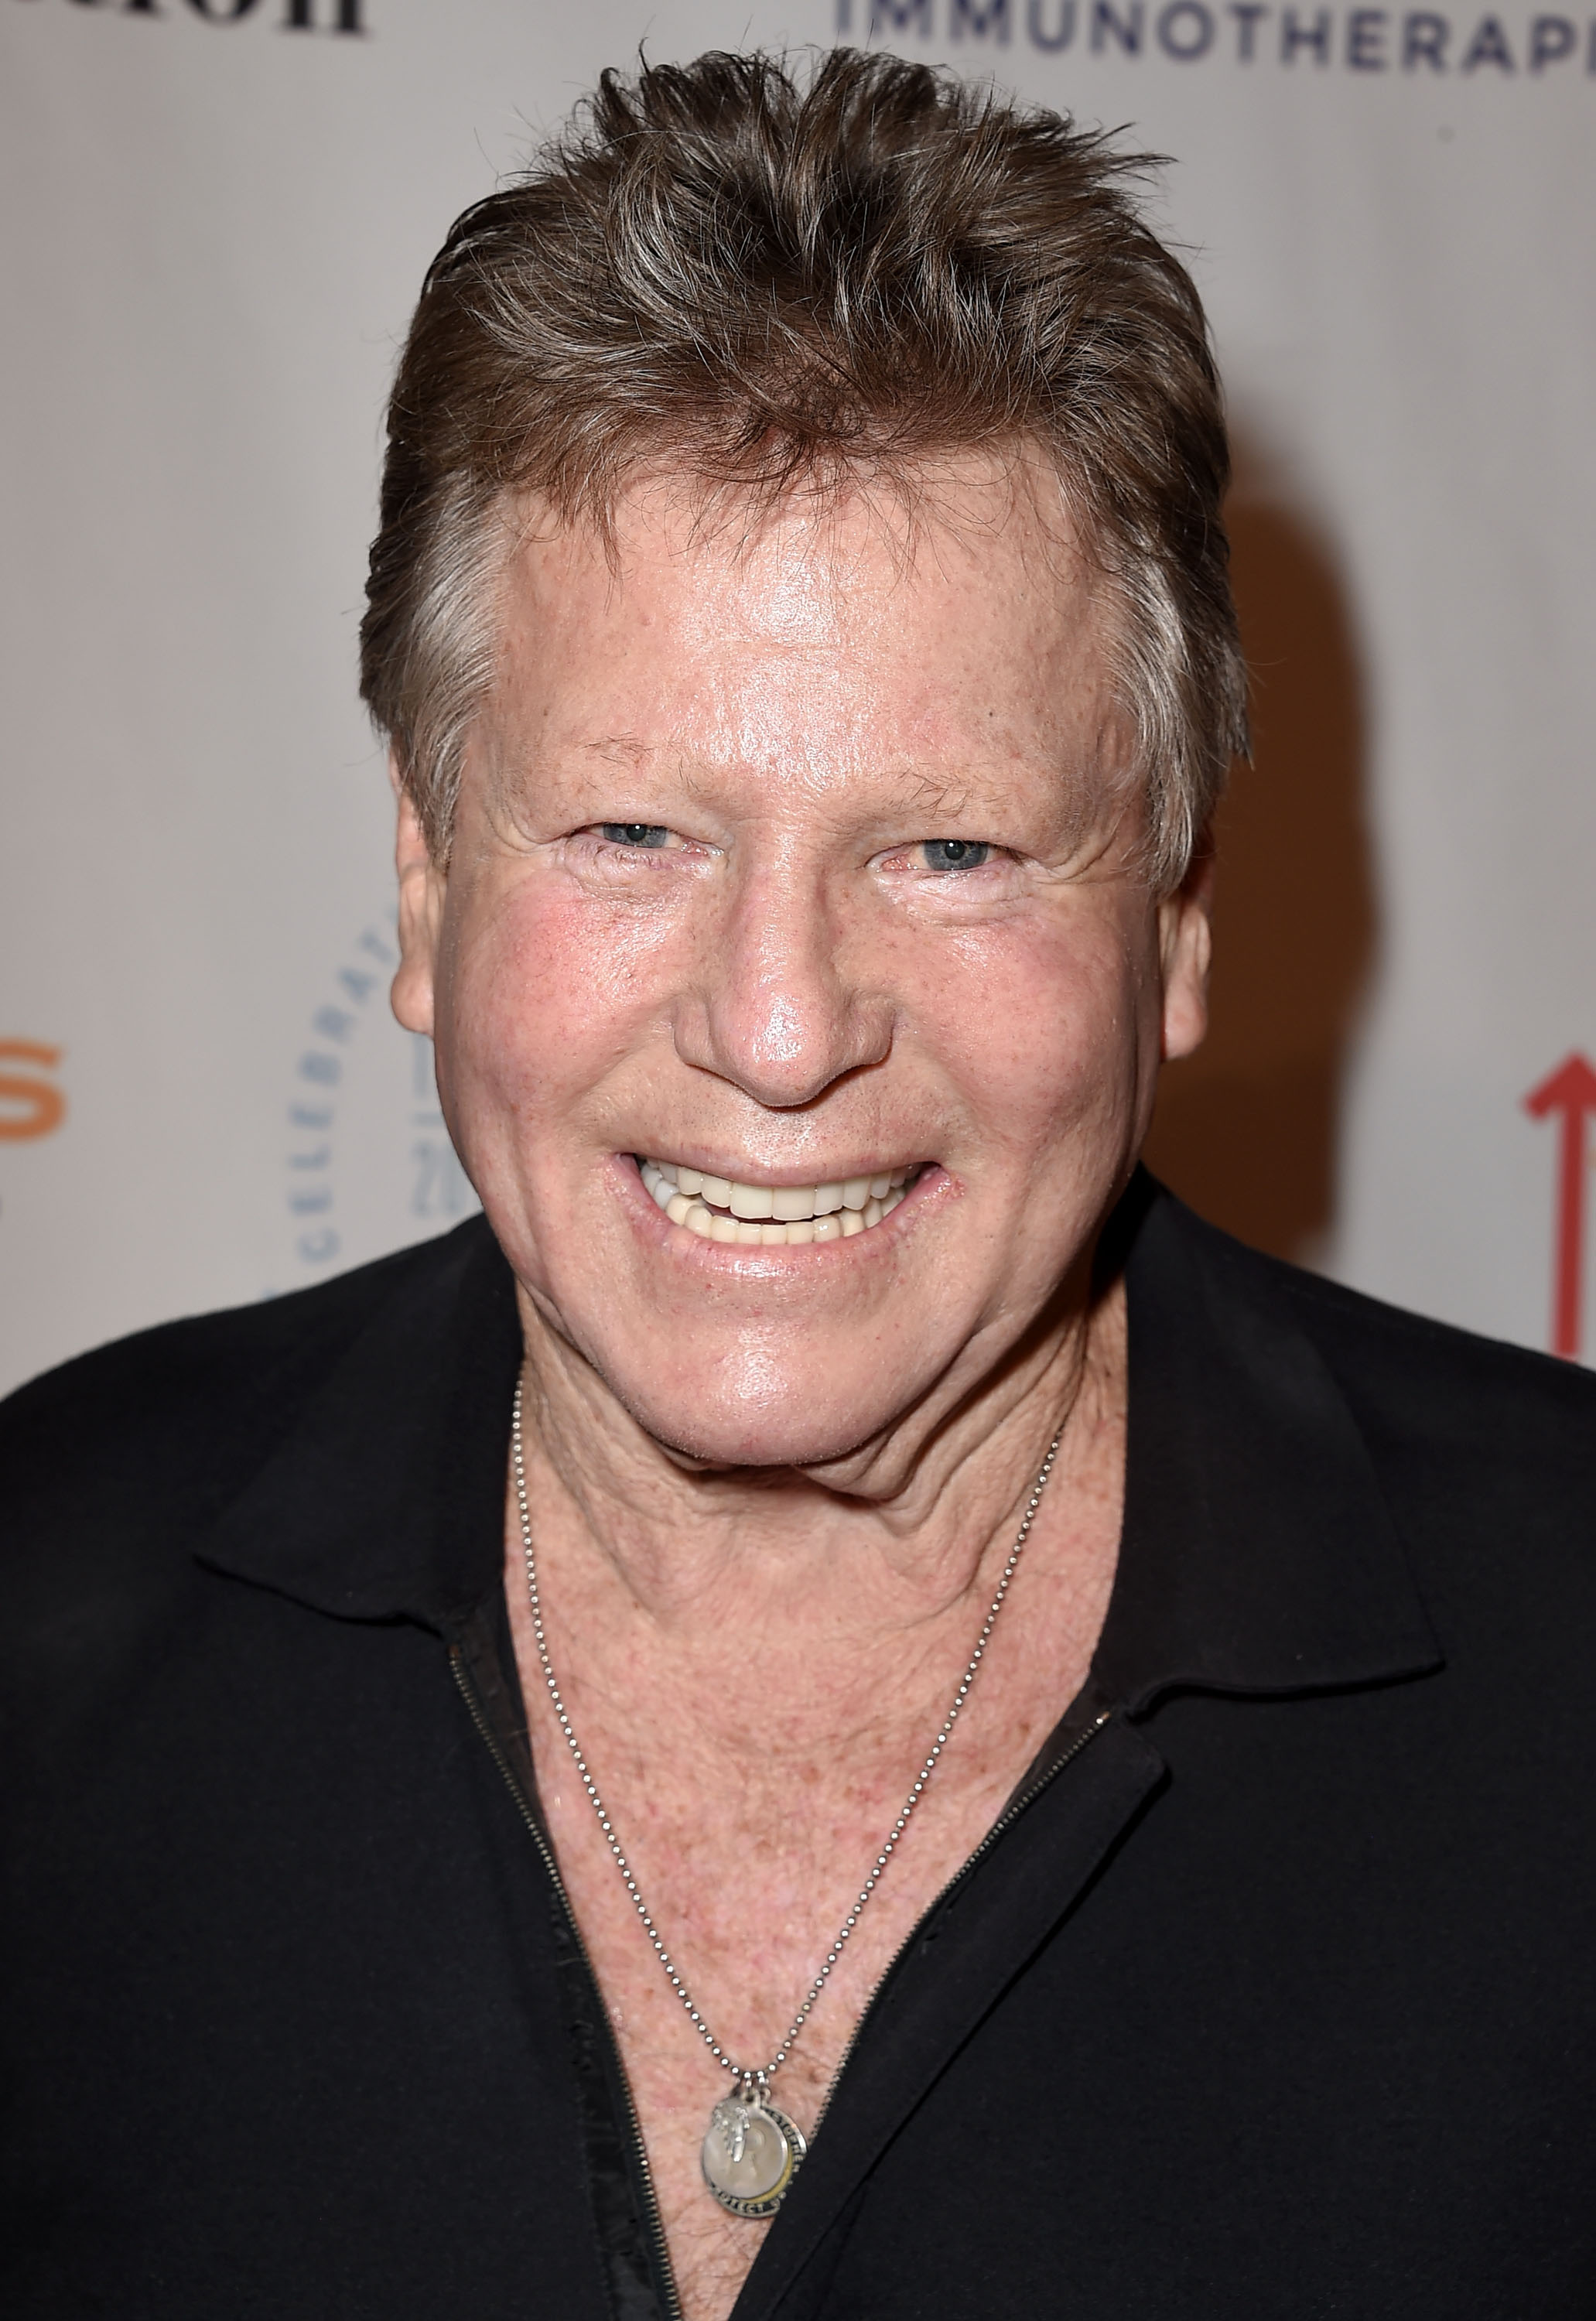 Ryan O'Neal at the Farrah Fawcett Foundation Presents on September 9, 2015 in Beverly Hills, California | Source: Getty Images